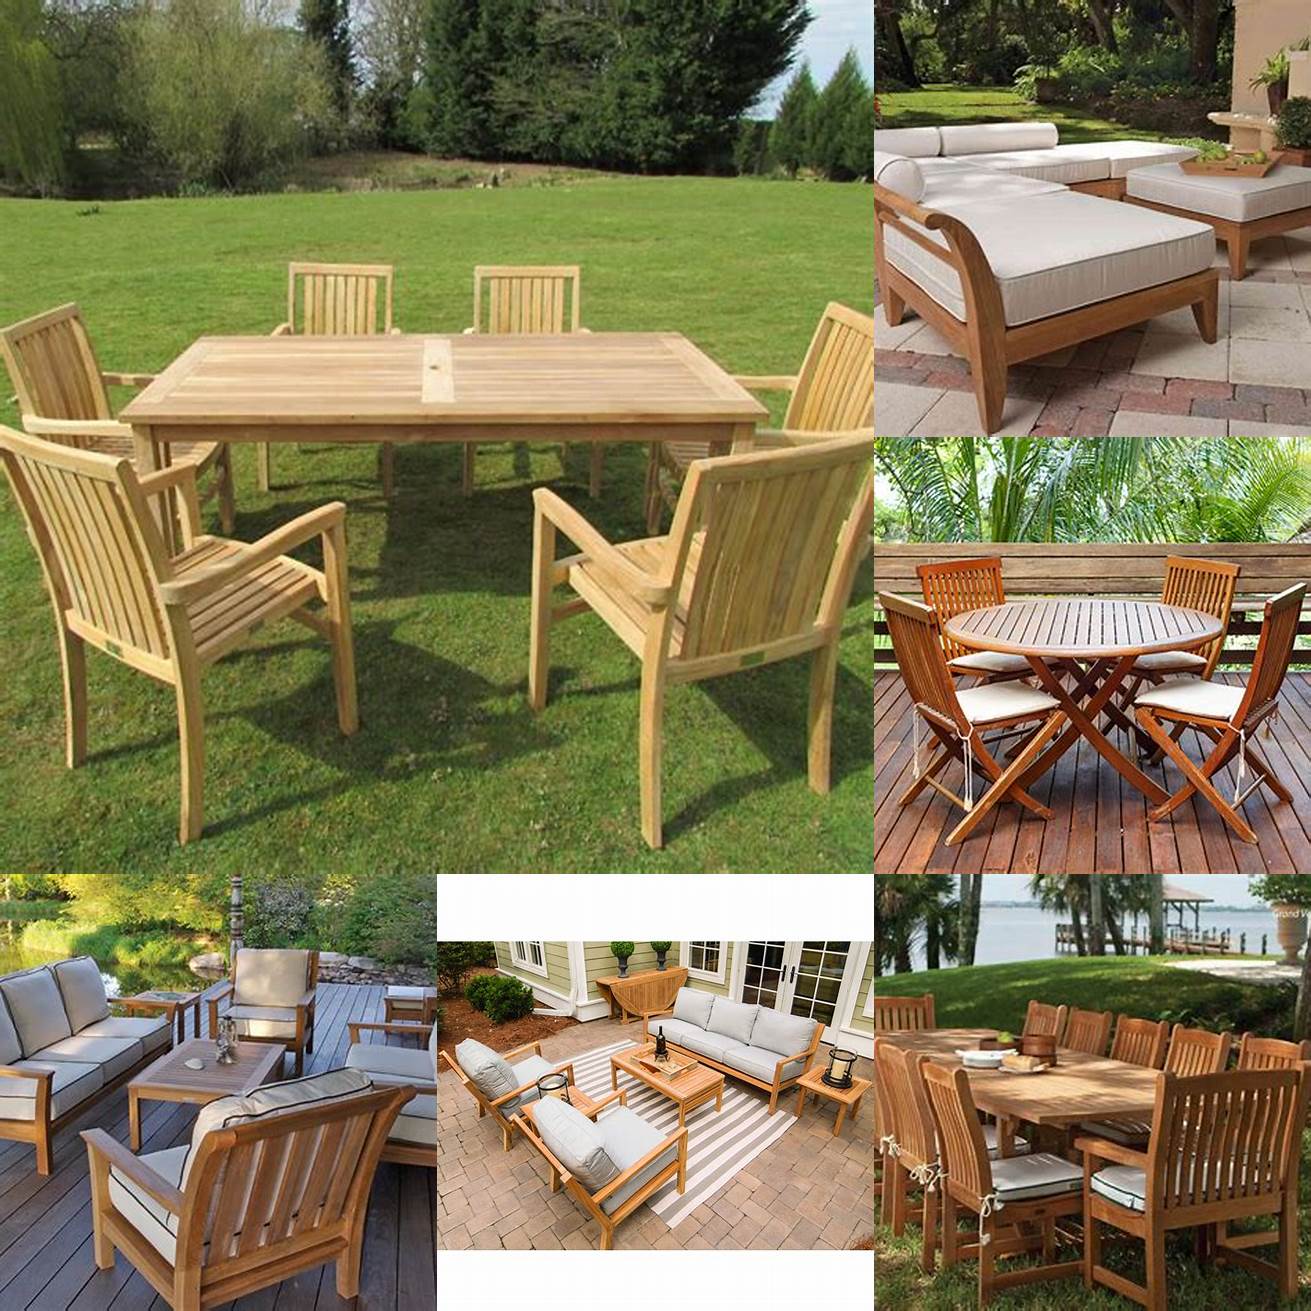 A Picture of Teak Furniture in a Variety of Styles